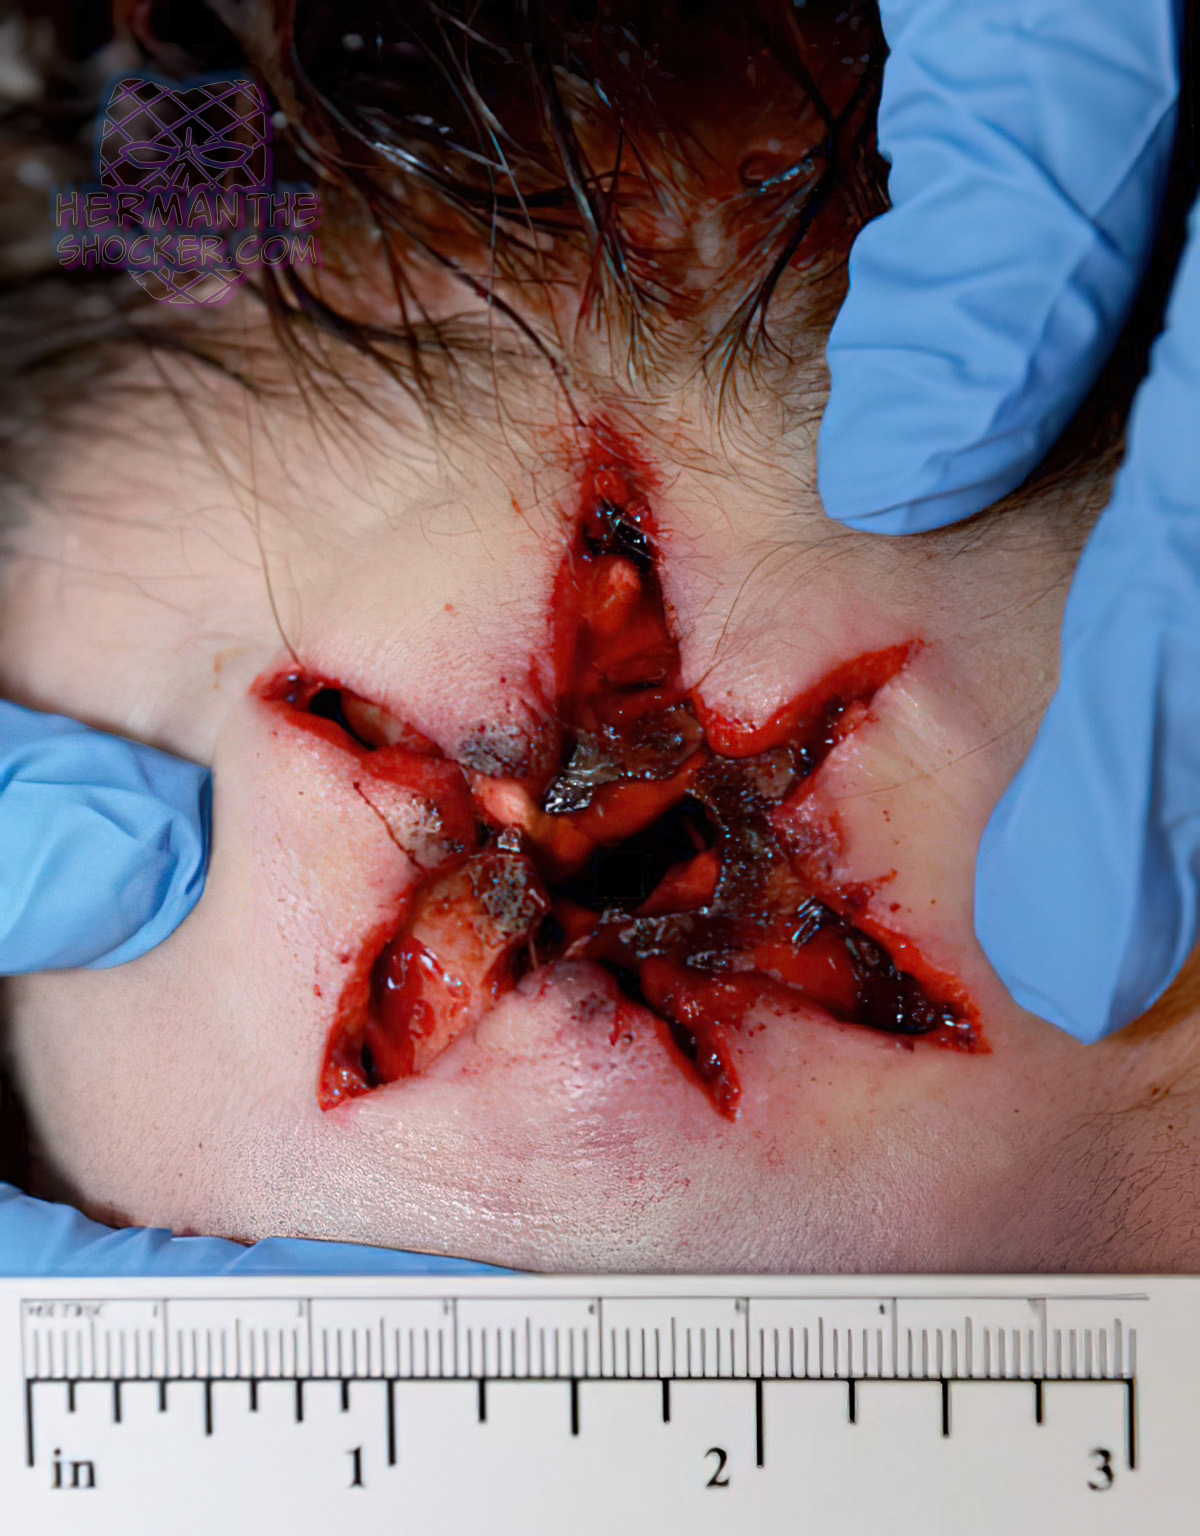 Contact gunshot wound with stellate blow back lacerations